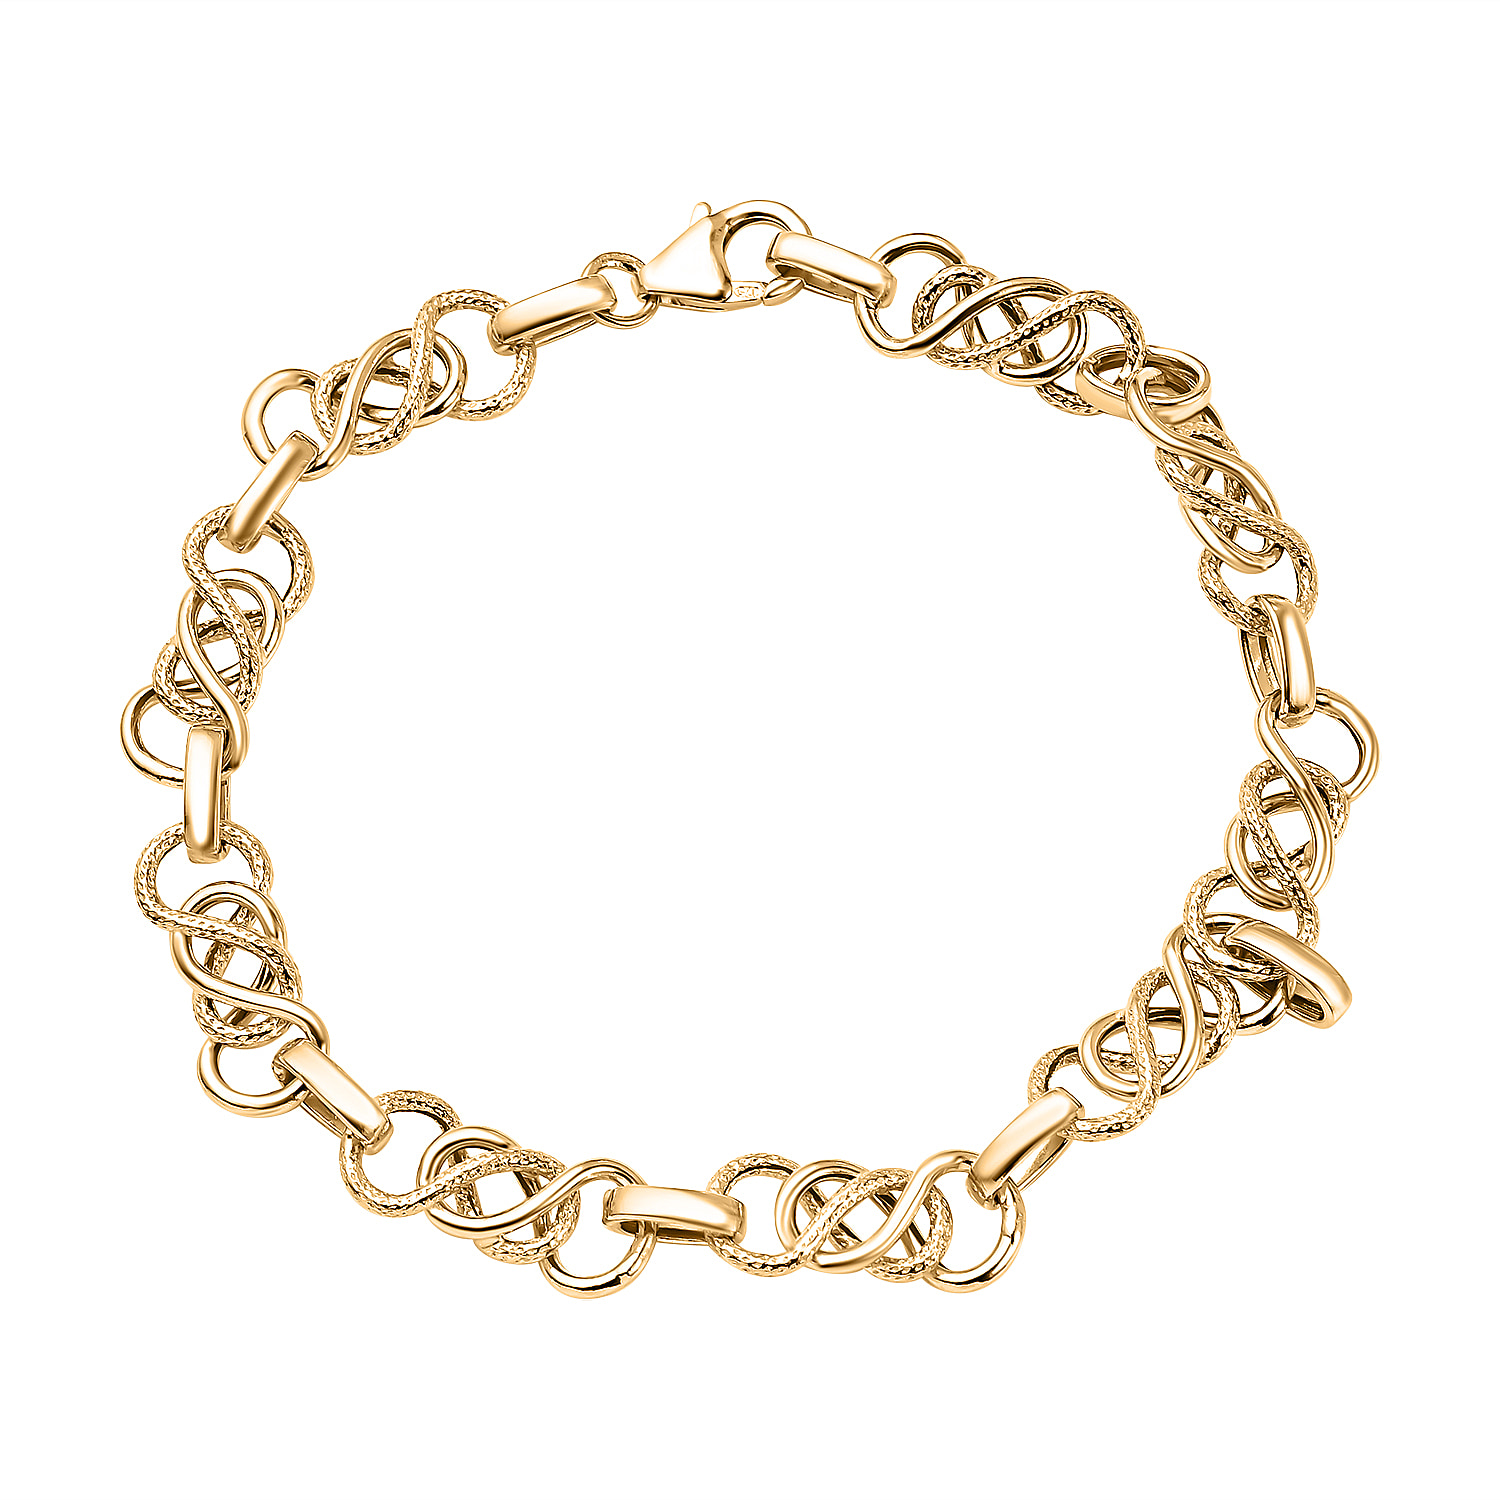 One Time Deal- 9K Yellow Gold Celtic Link Bracelet (Size - 7.5) Gold Weight 3.7gms